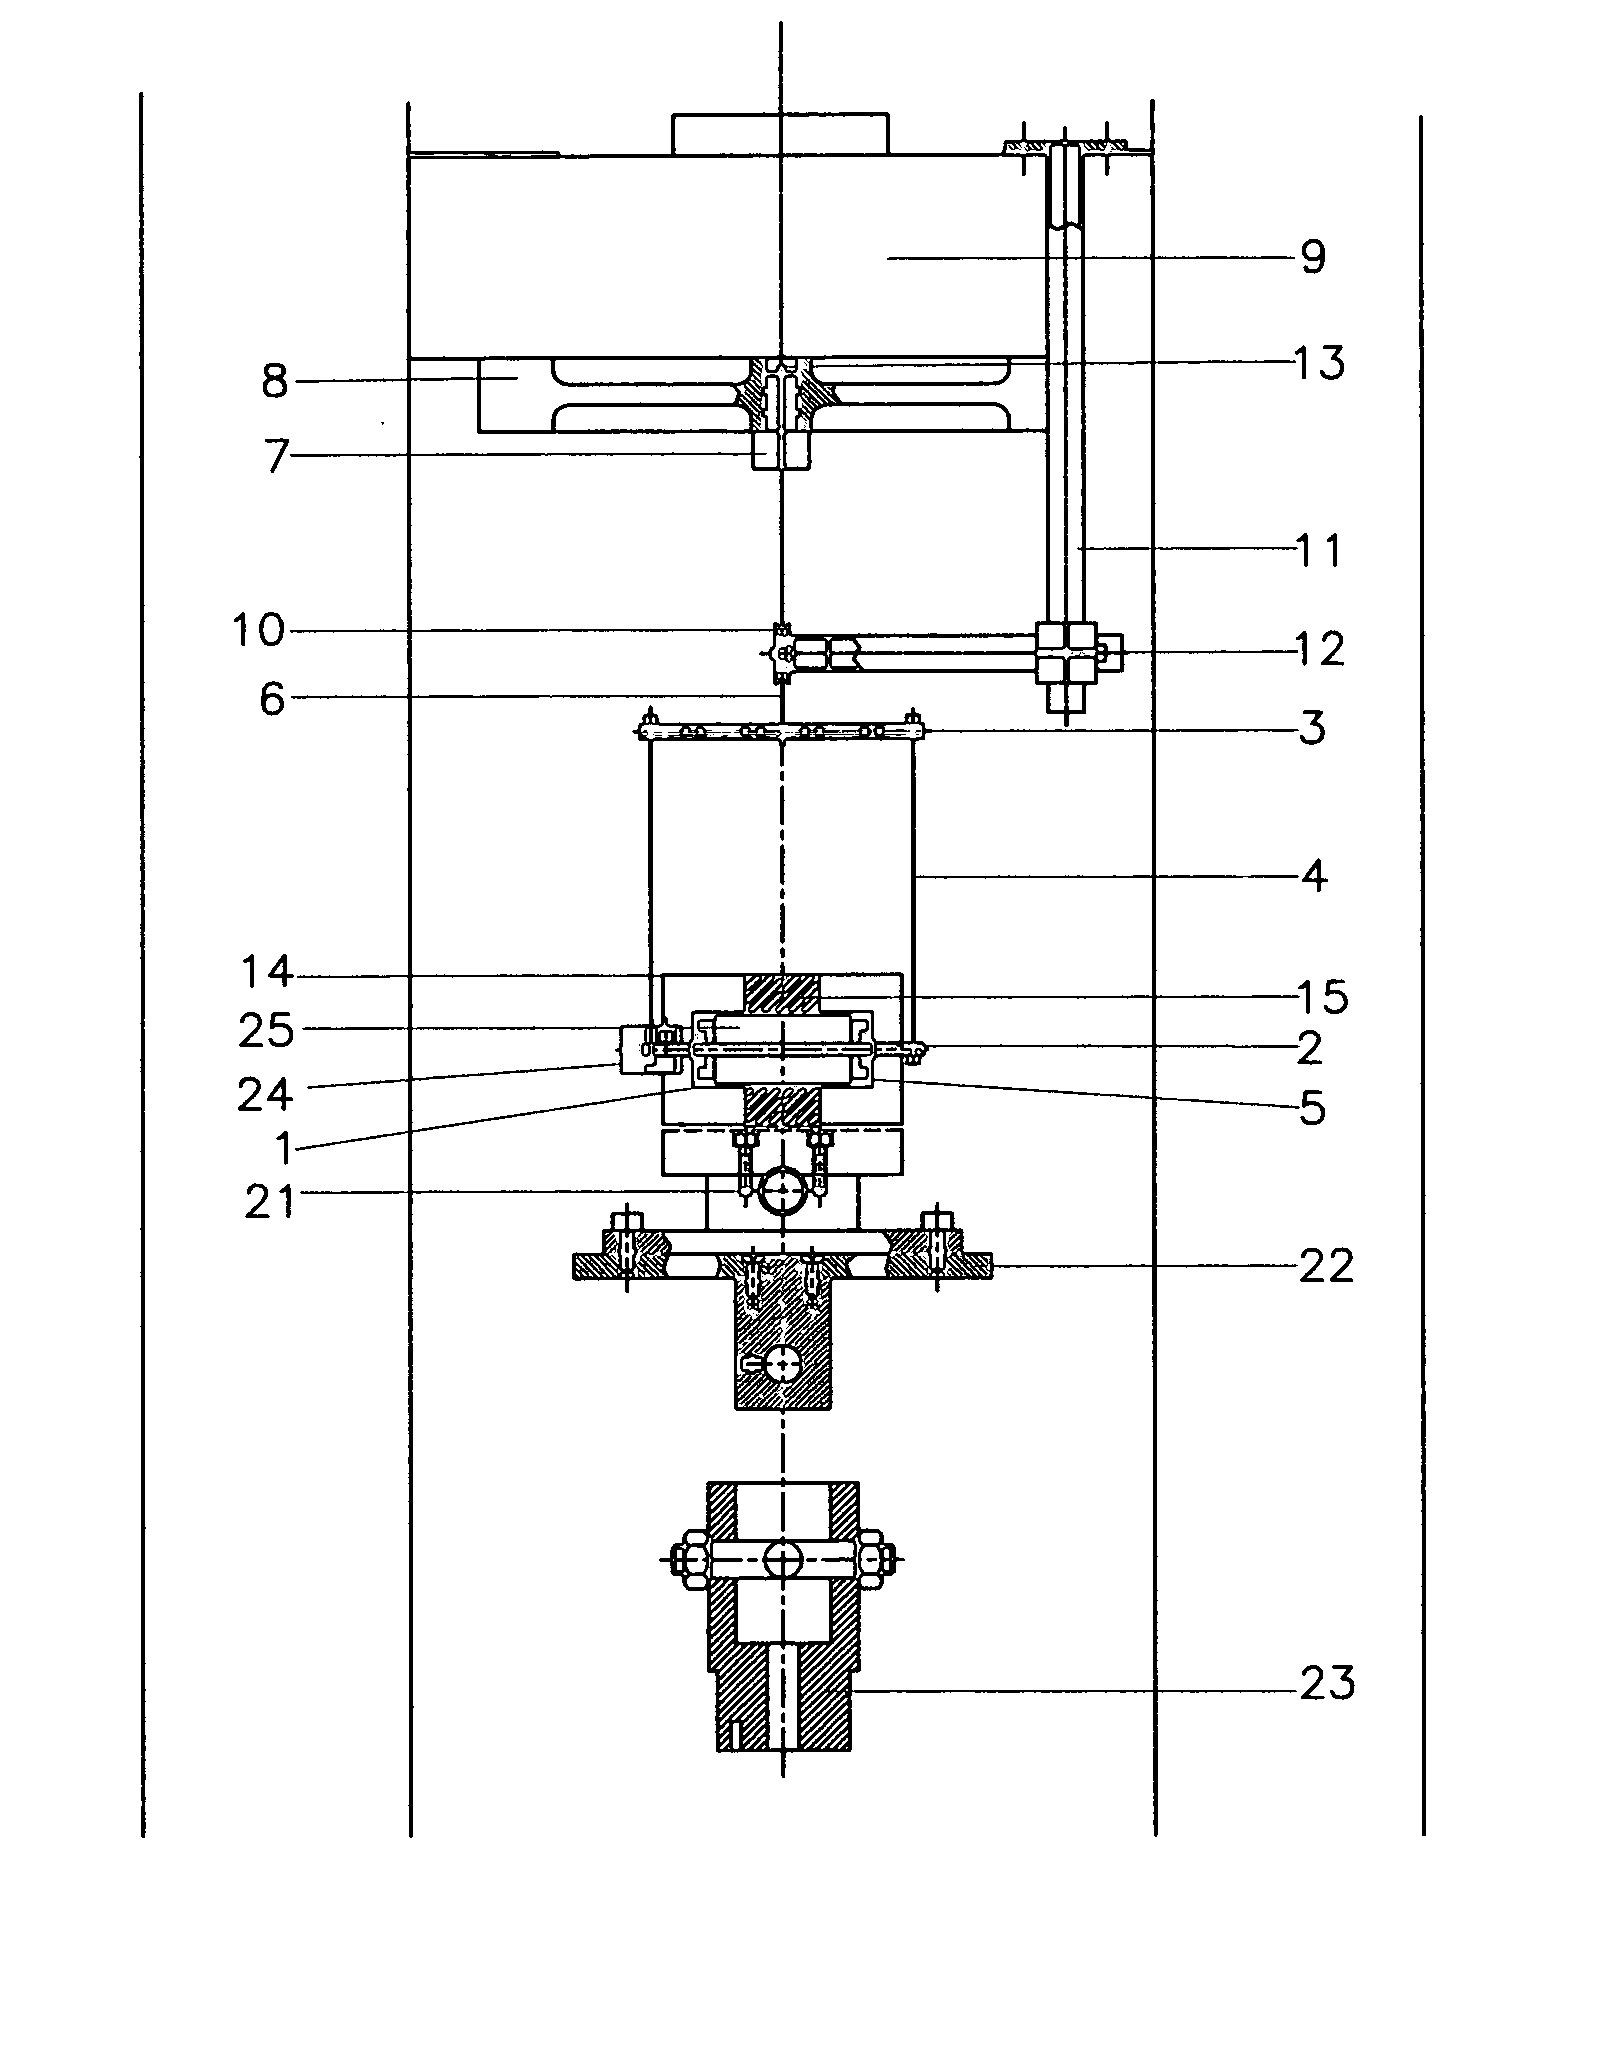 Method and apparatus for testing the rolling tack of pressure-sensitive adhesives